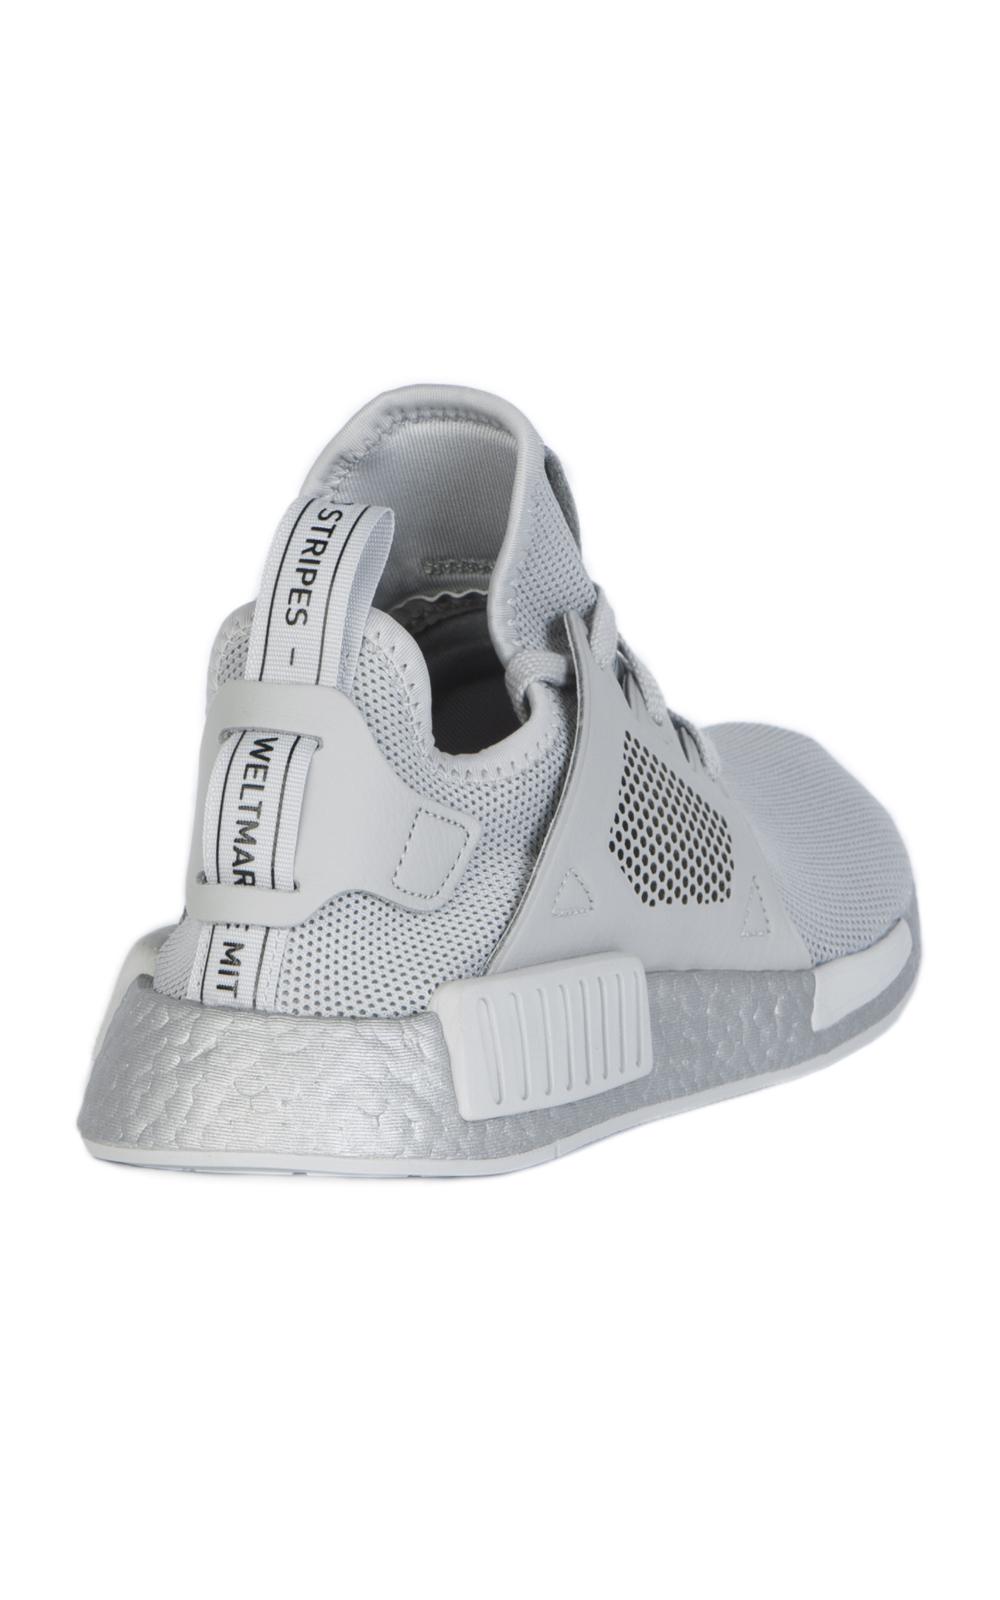 adidas Originals Leather Nmd Xr1 Triple Grey in Gray for Men - Lyst